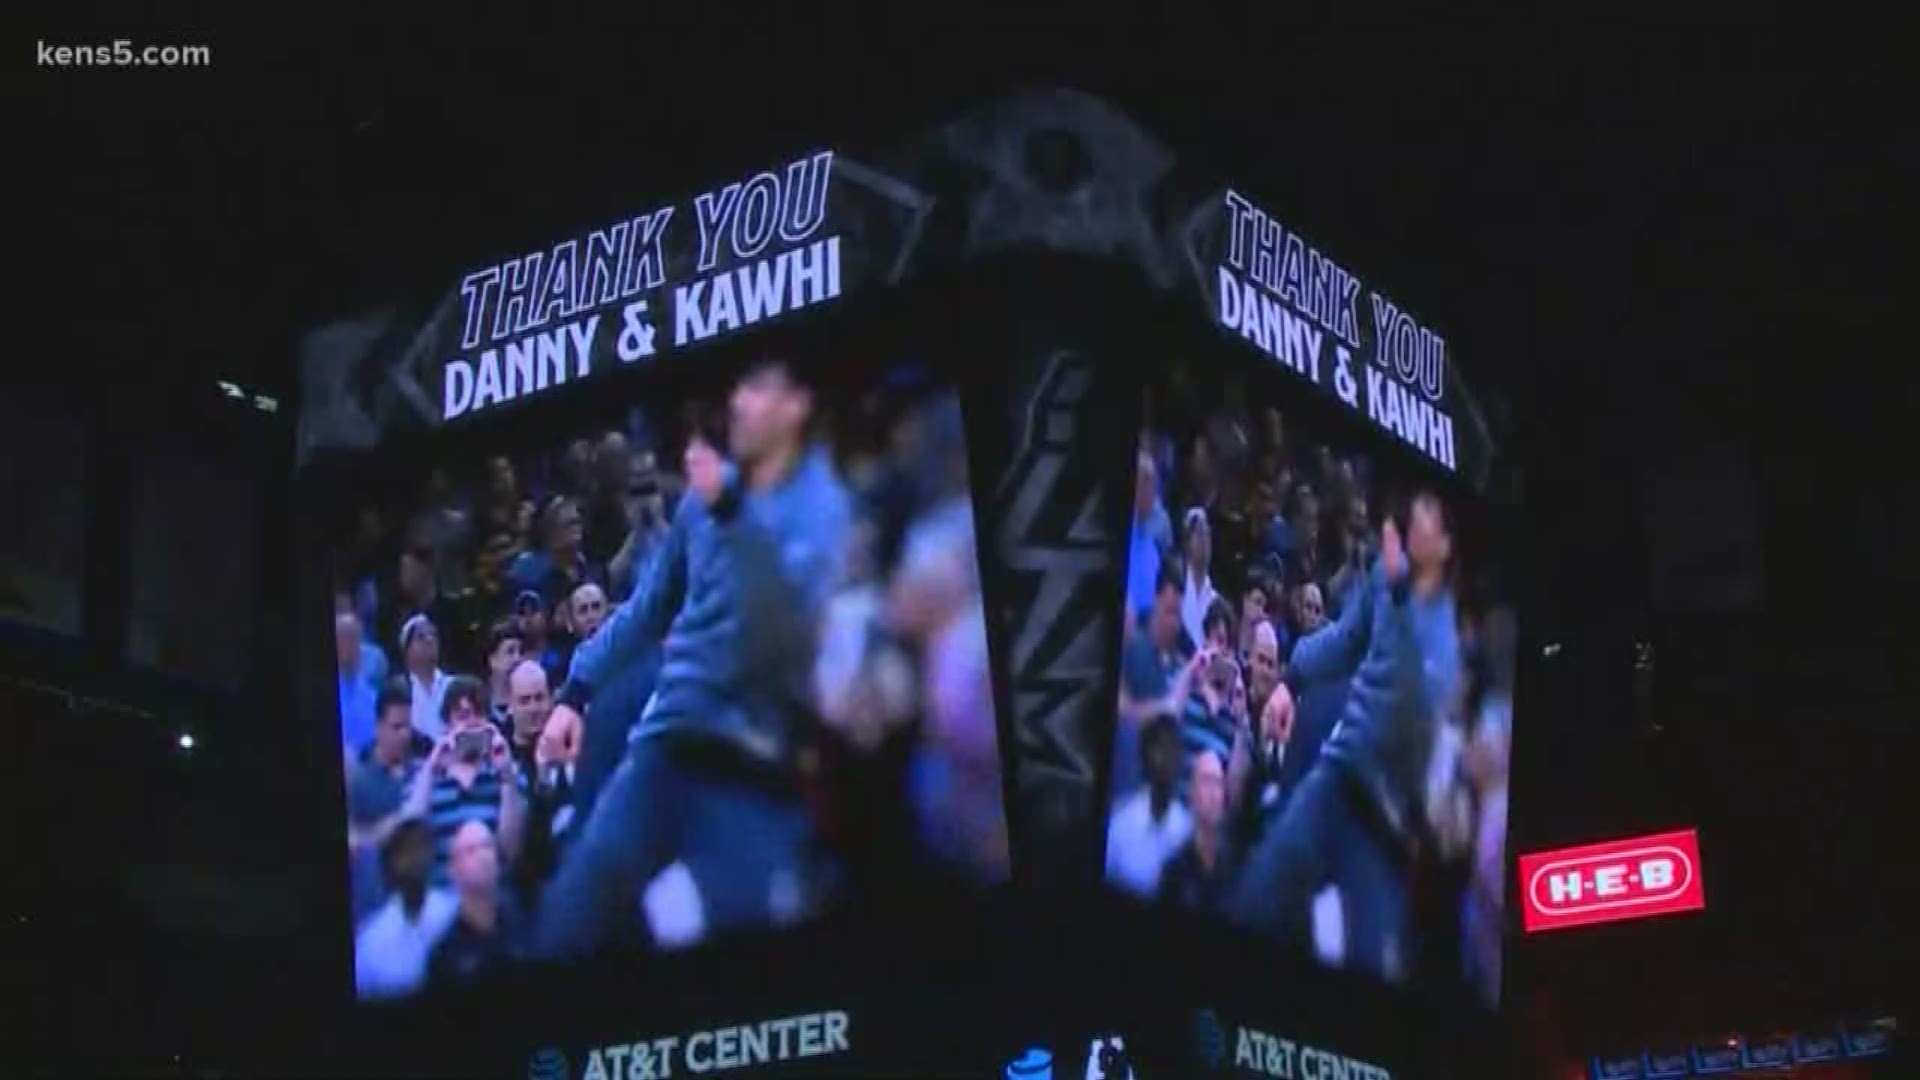 Despite a tribute video for Danny Green and Kawhi Leonard, the fans wouldn't let Kawhi off the hook, booing him every time he touched the ball.